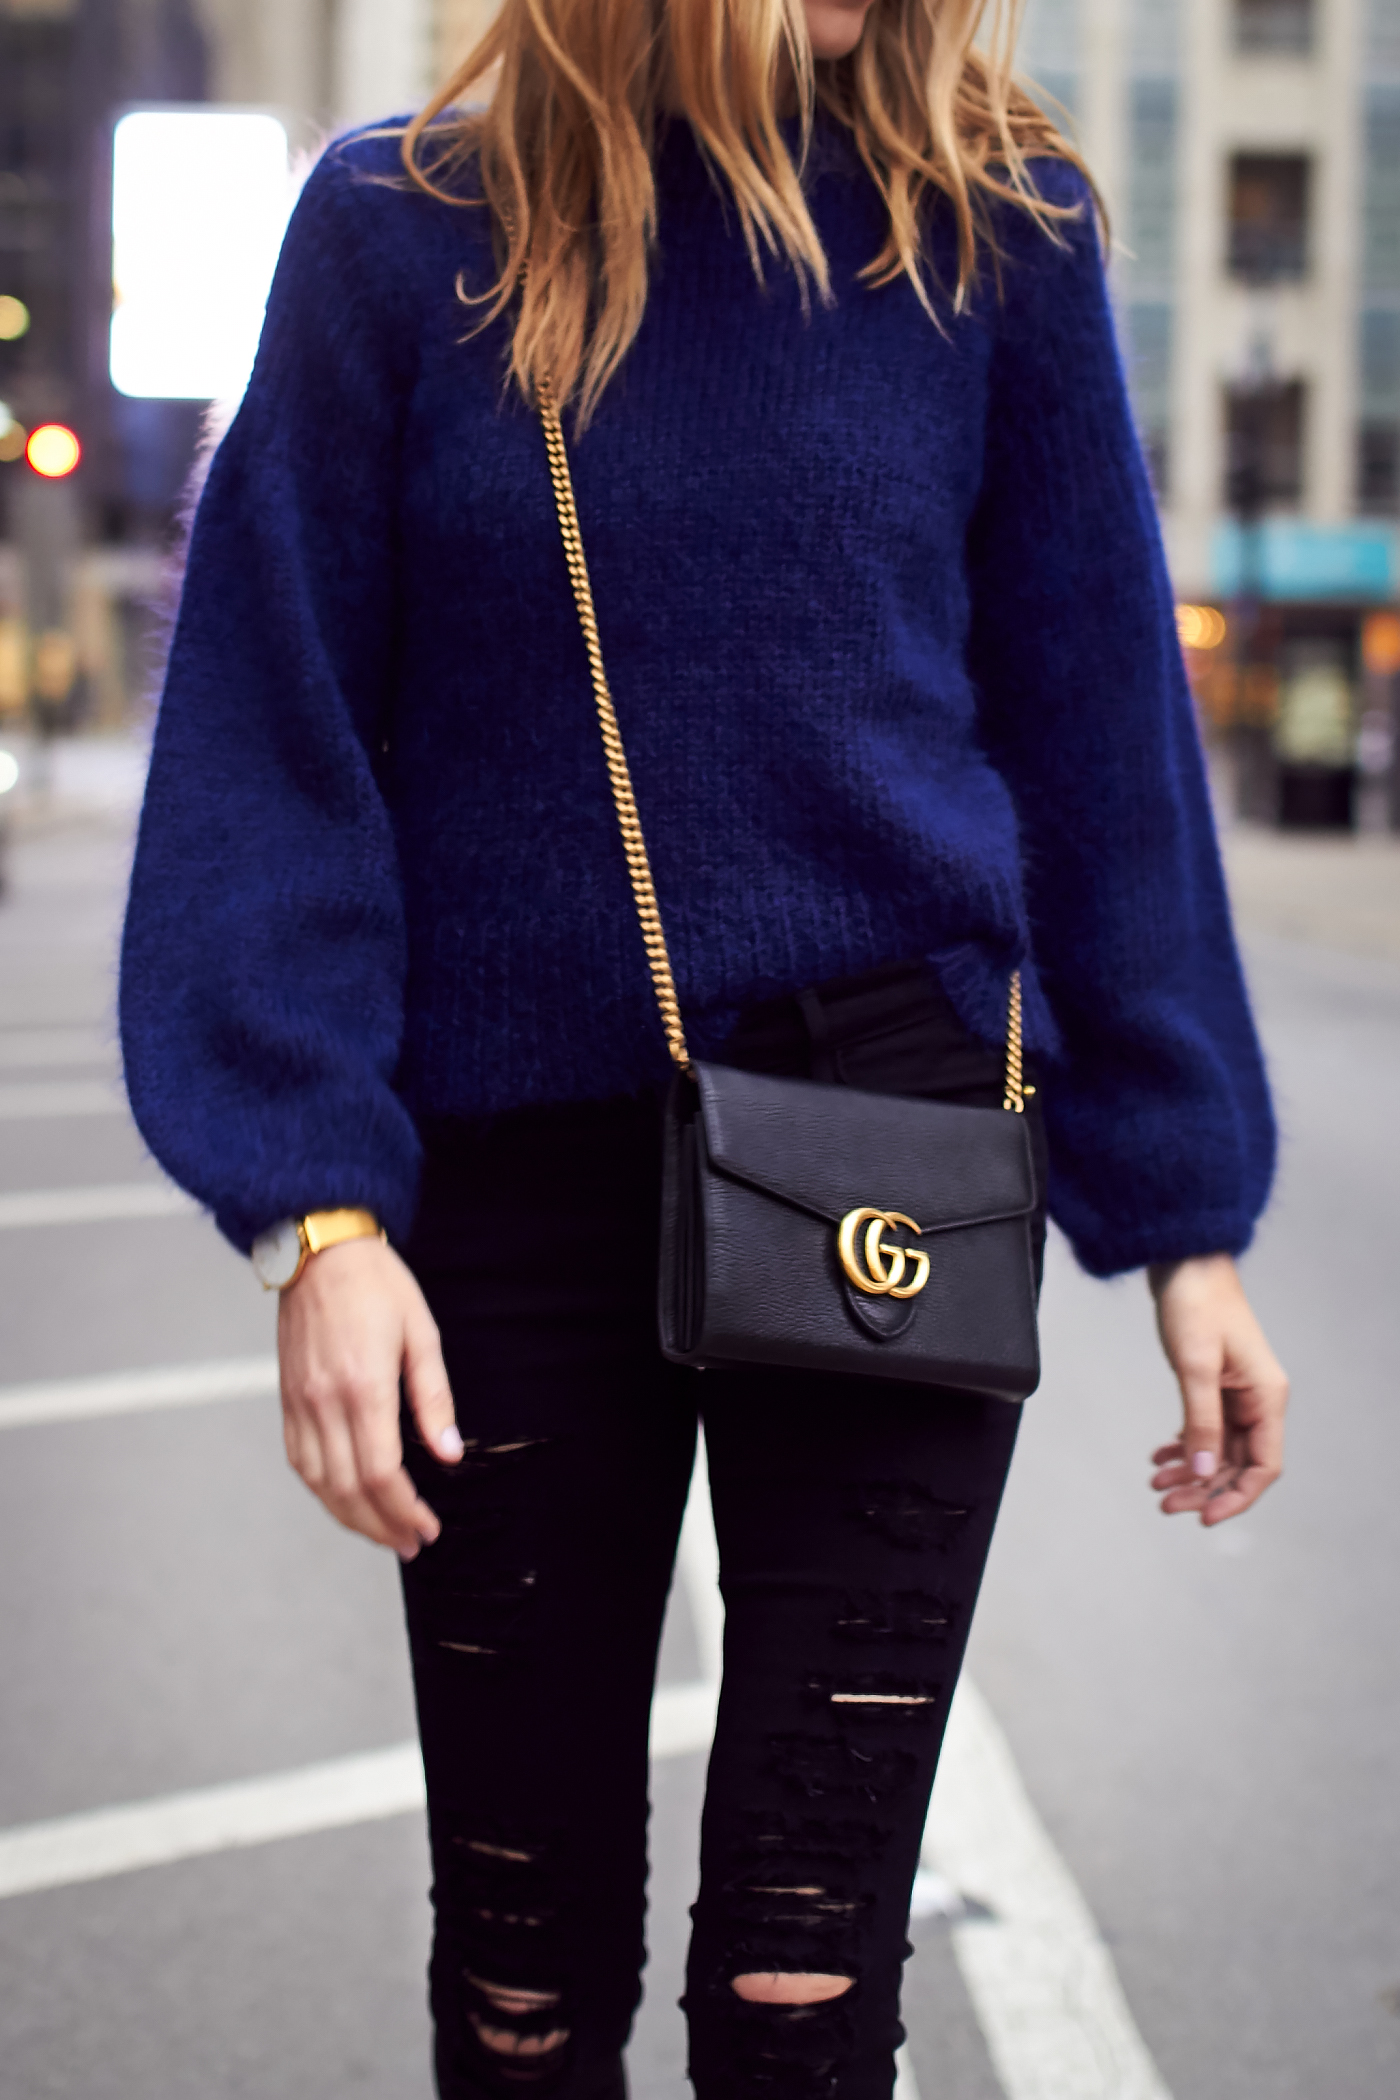 Fall Outfit, Frame Denim Black Ripped Skinny Jeans, Valentino Rockstud Pumps, Gucci Marmont Handbag, Navy Oversized Sweater